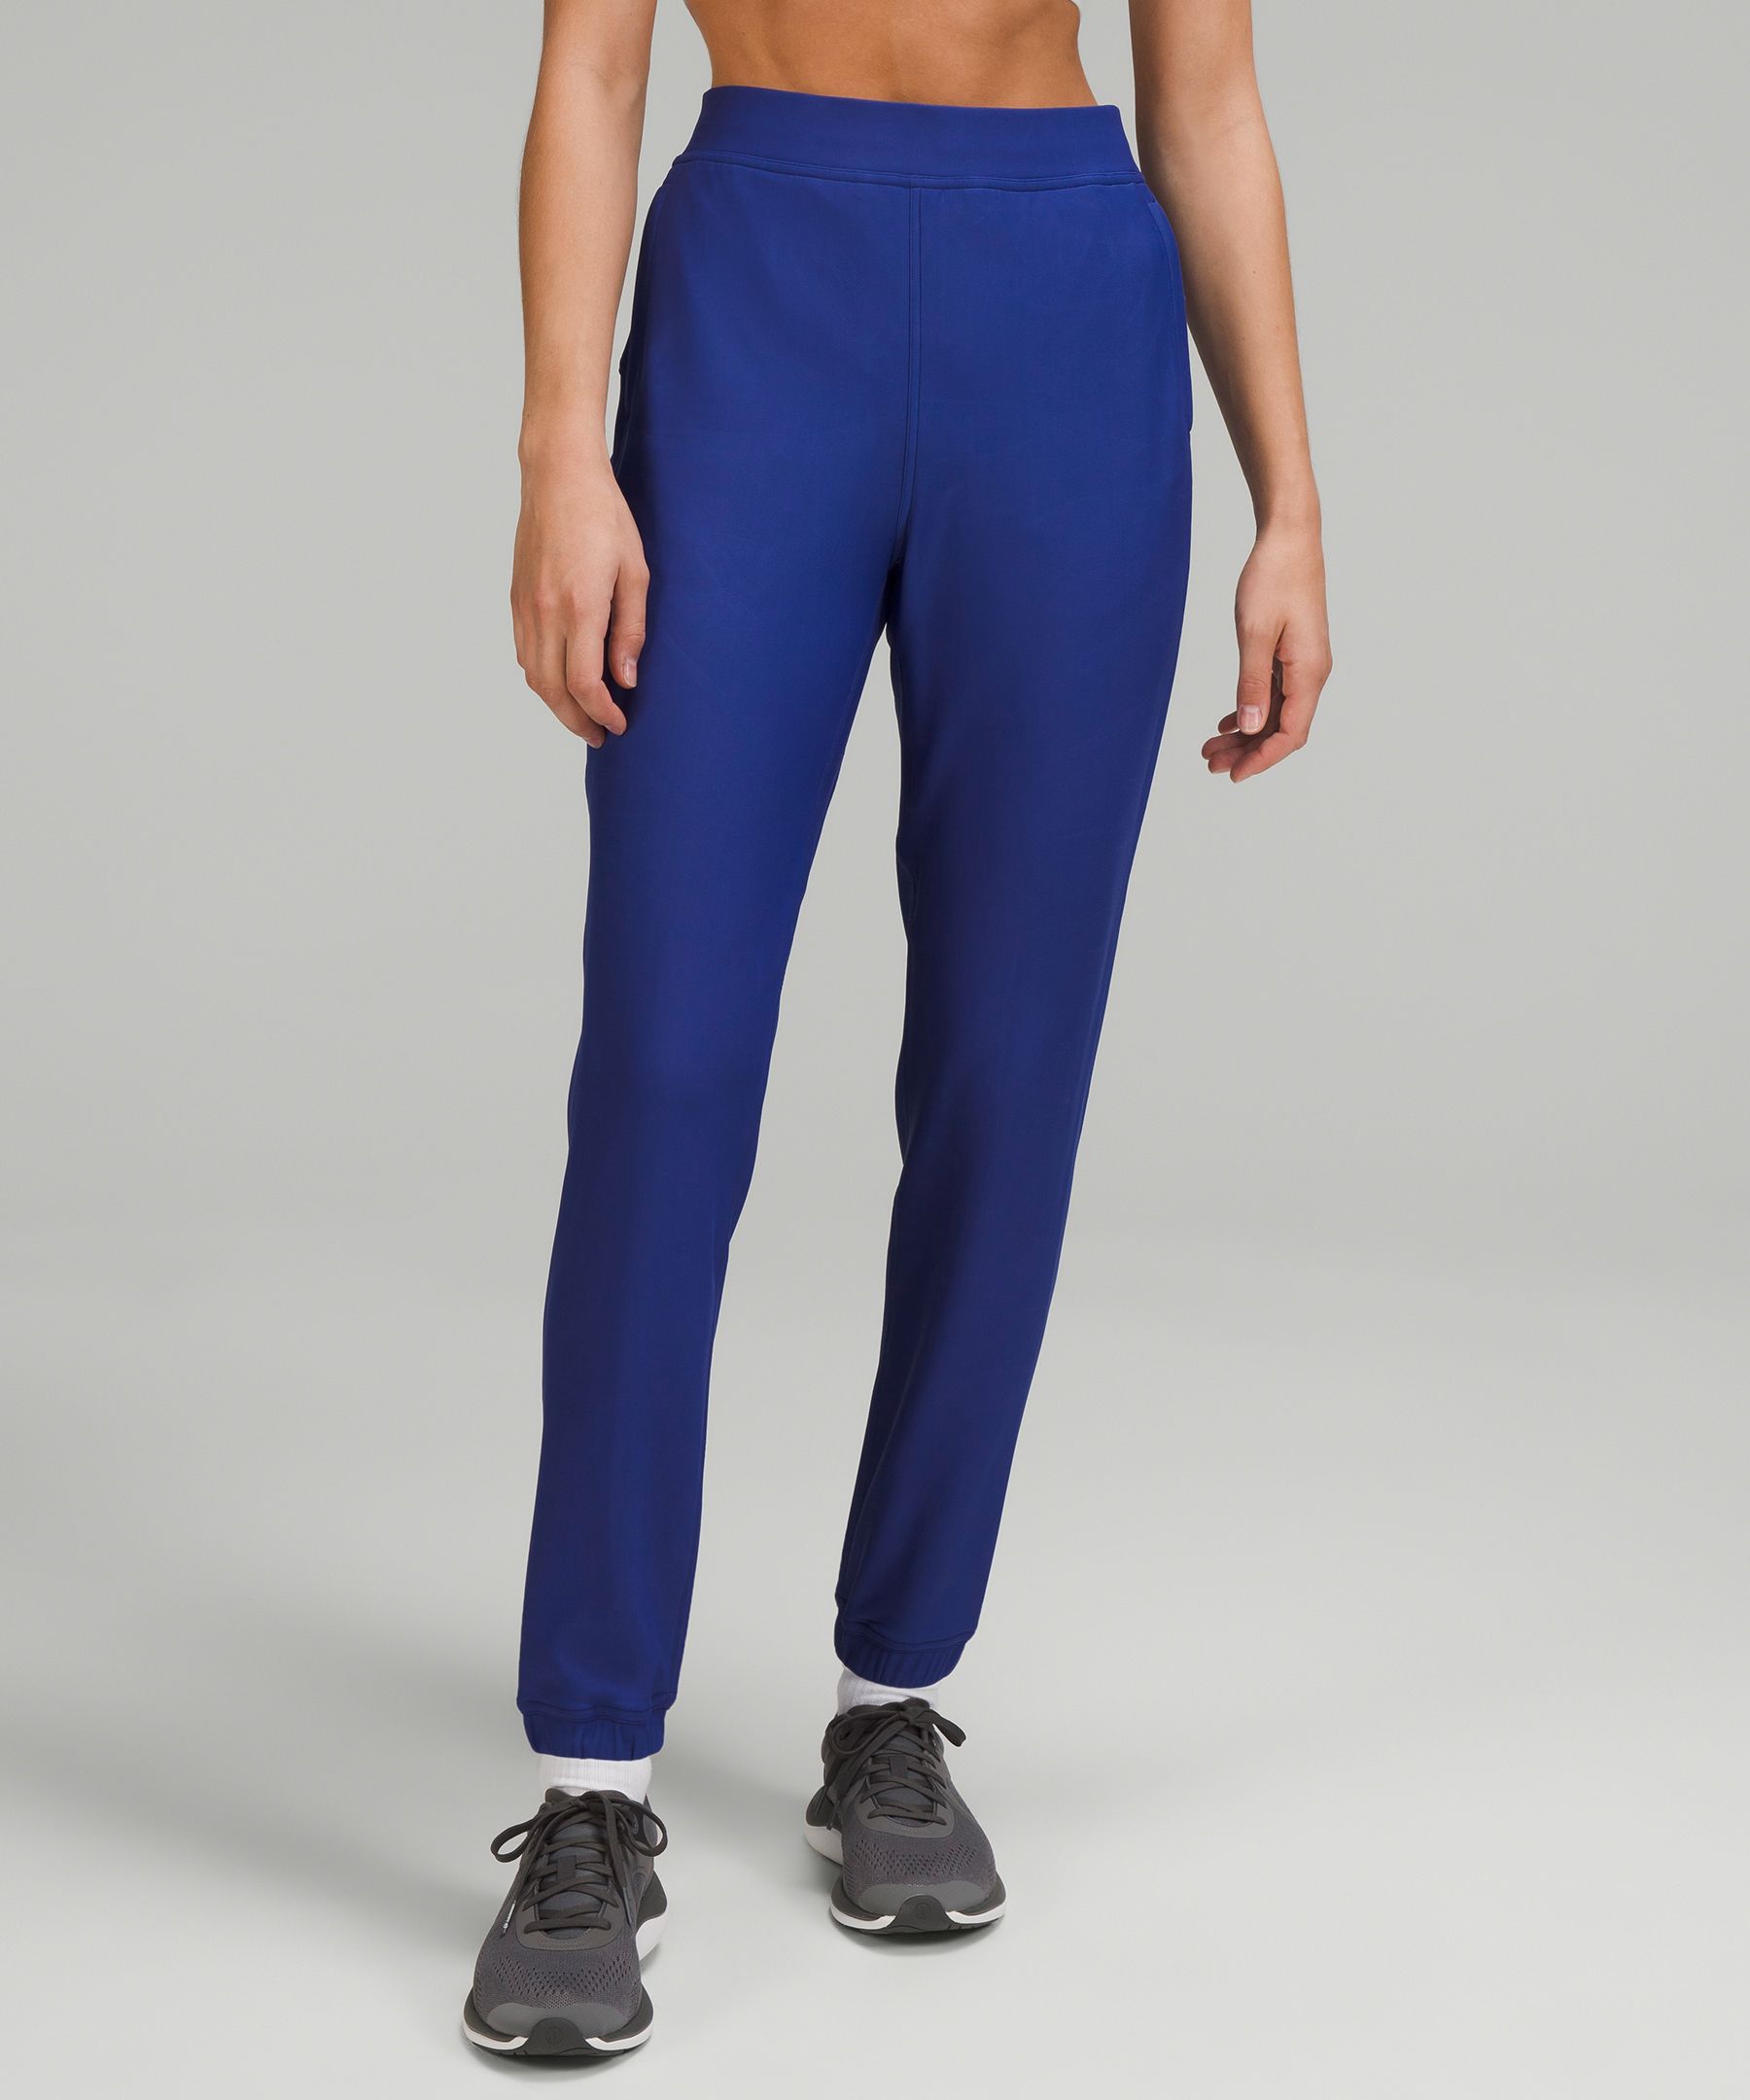 Adapted State High-Rise Fleece Jogger, Women's Joggers